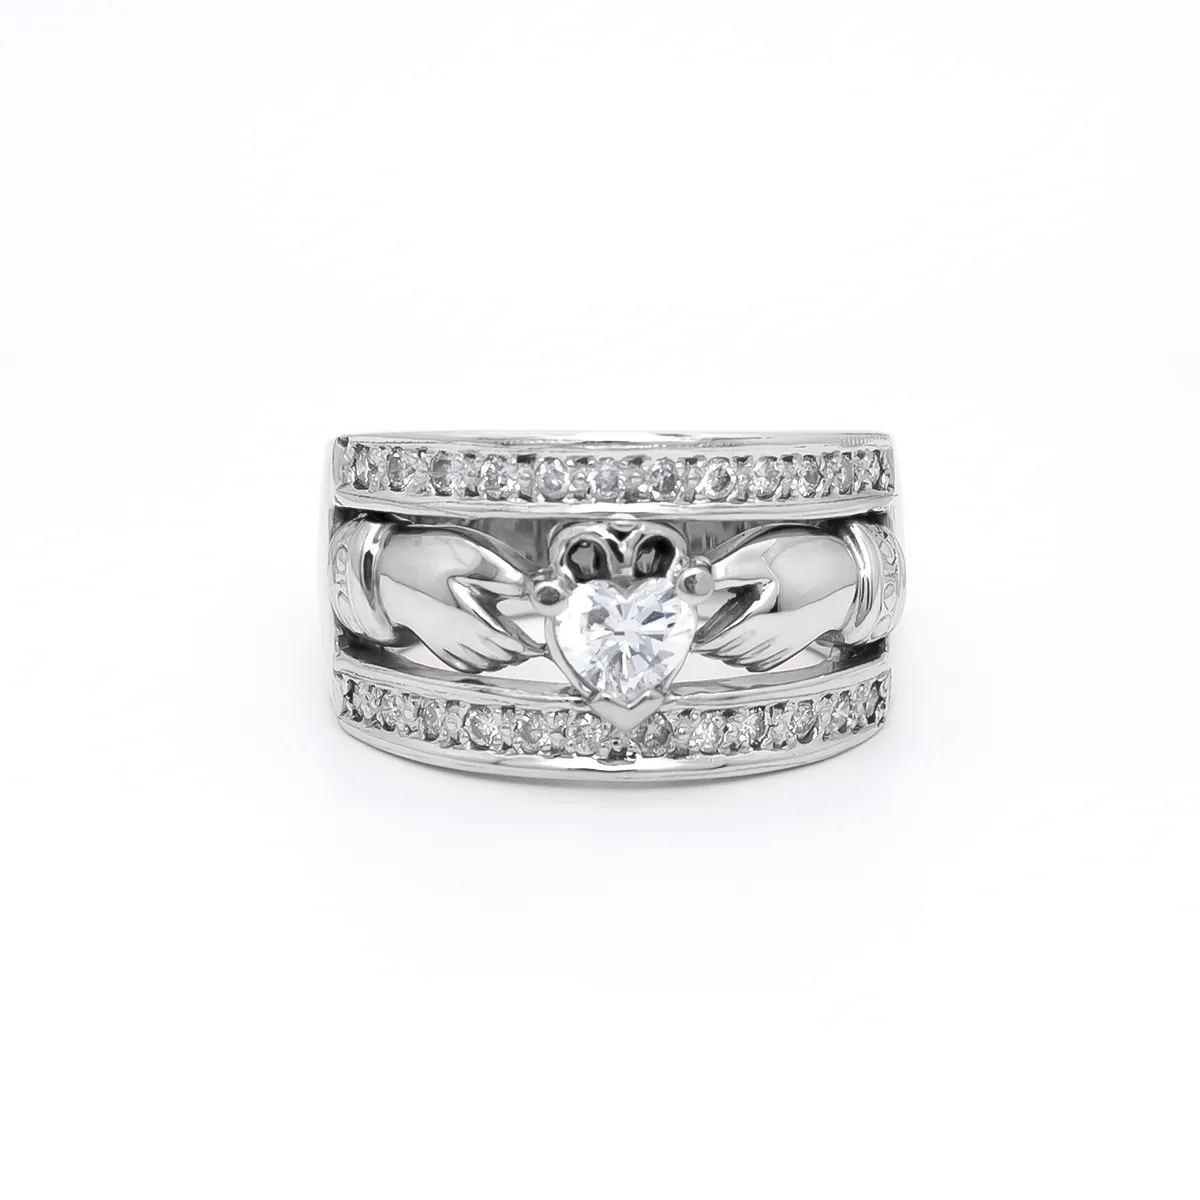 1 A White Gold Heartshape Wide Diamond Claddagh Ring...